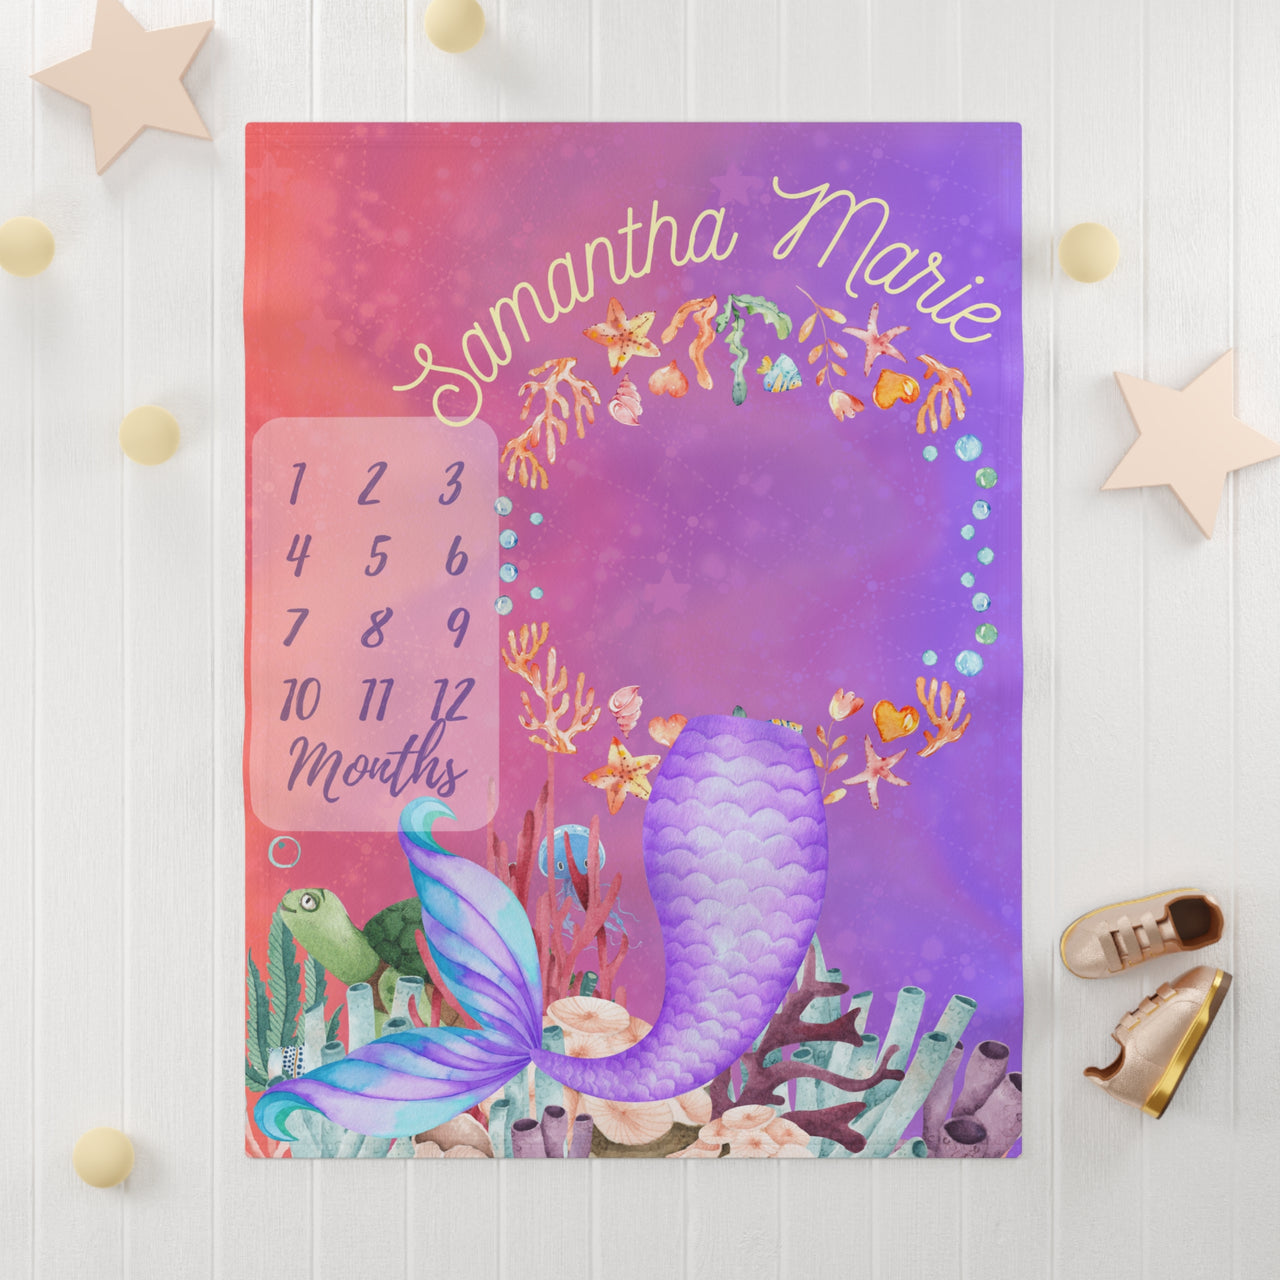 Girly Mermaid Pink Purple Soft Fleece Milestone Blanket, Monthly Growth Tracker, Personalized Baby Blanket, Baby Shower Gift, Baby Advent